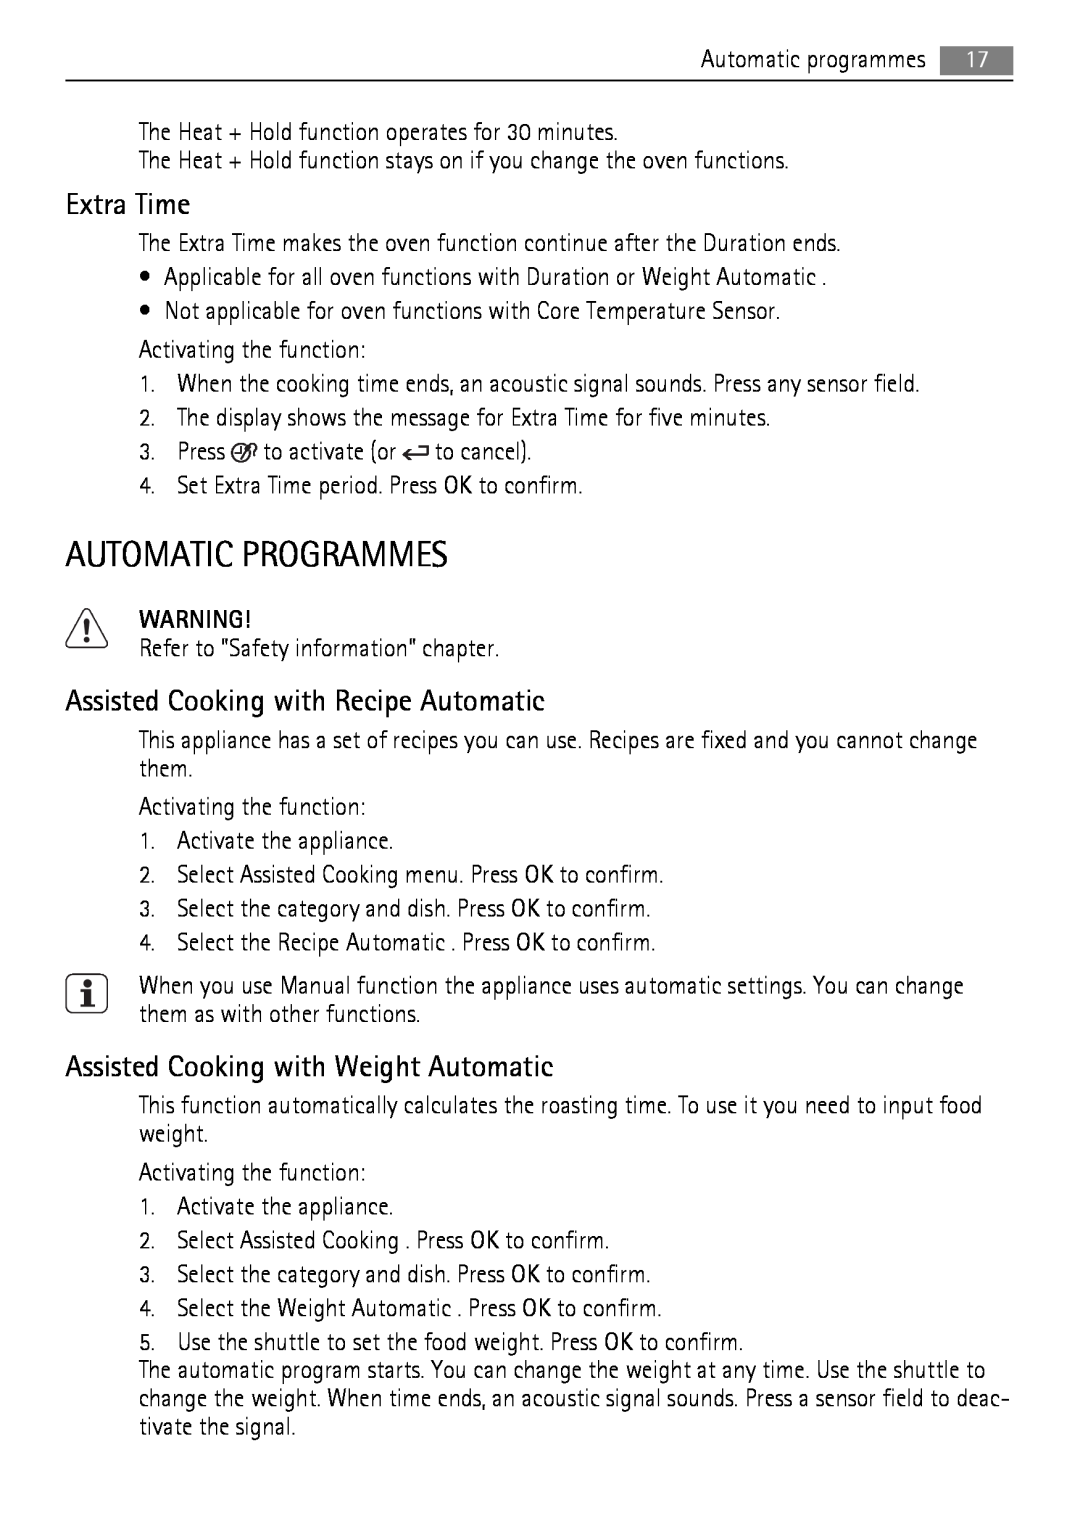 AEG BS9304001 user manual Automatic Programmes, Extra Time, Assisted Cooking with Recipe Automatic 